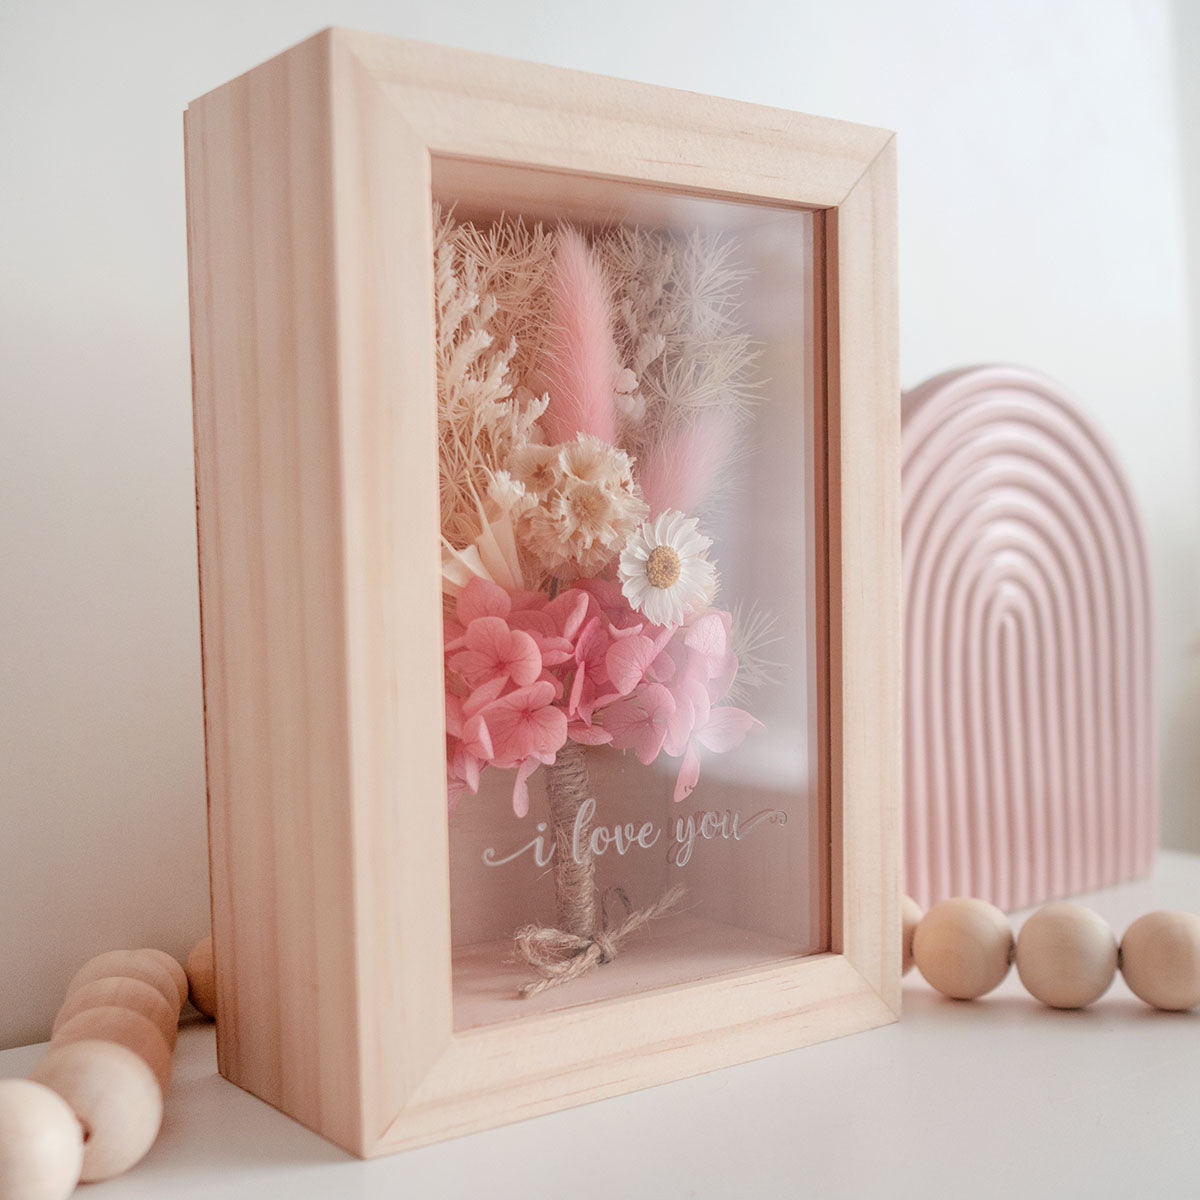 This is a wooden flower box with dried  pink  and white flowers and  grass. This is a side view with thext "i love you"